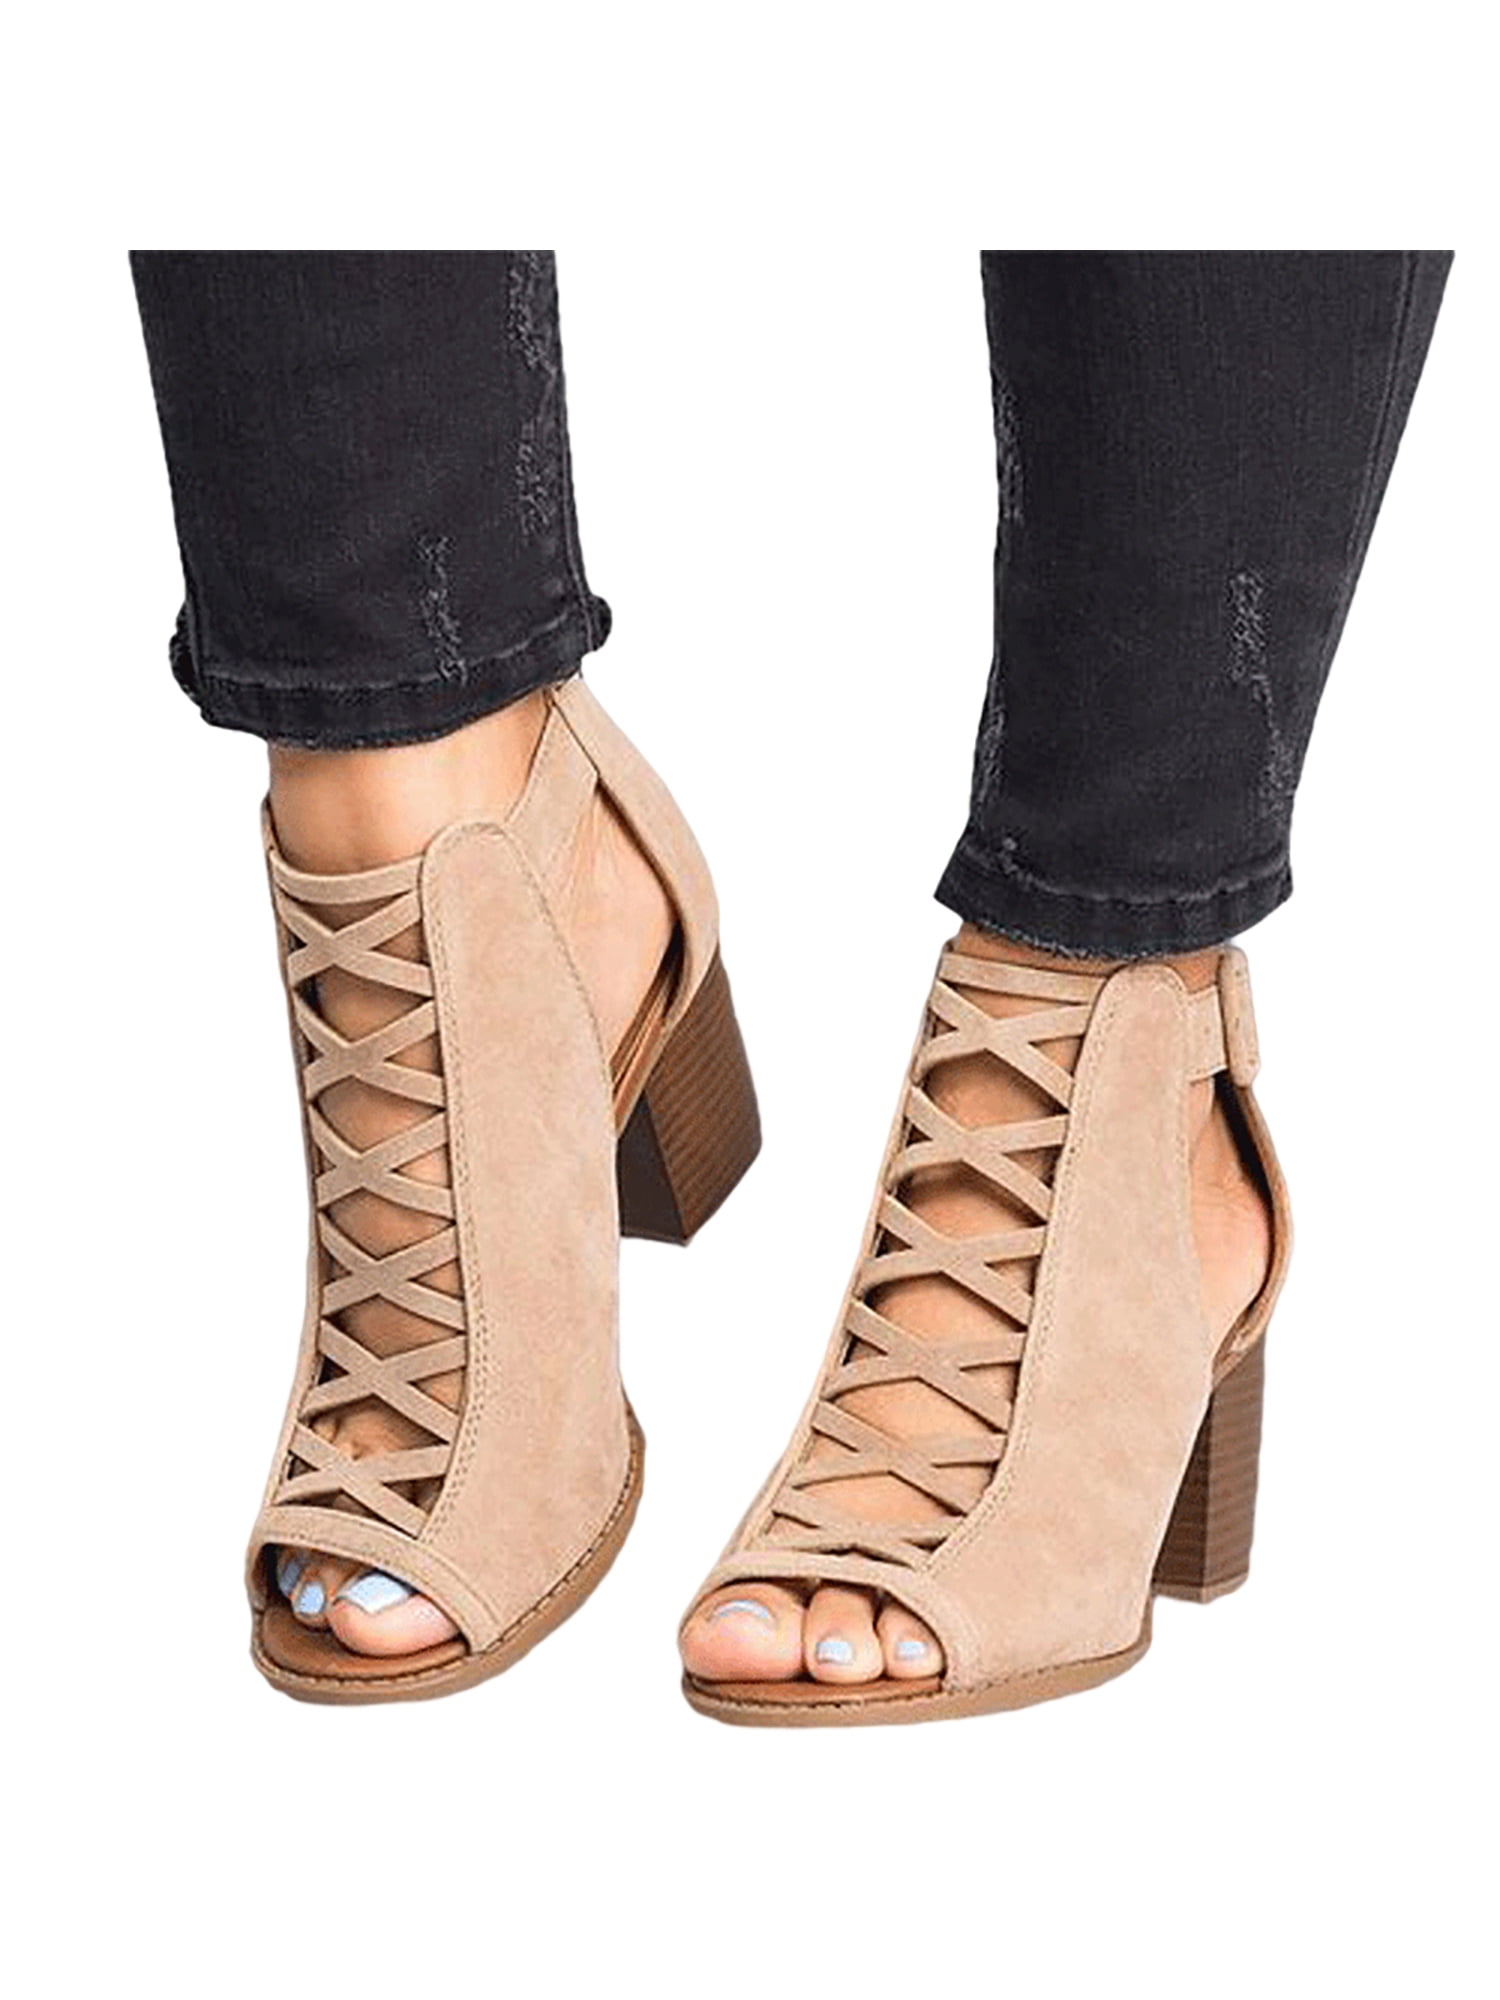 Women Lace Up High Heel Platform Open Toe Ankle Boots Slingback Zip Sandals Chic 